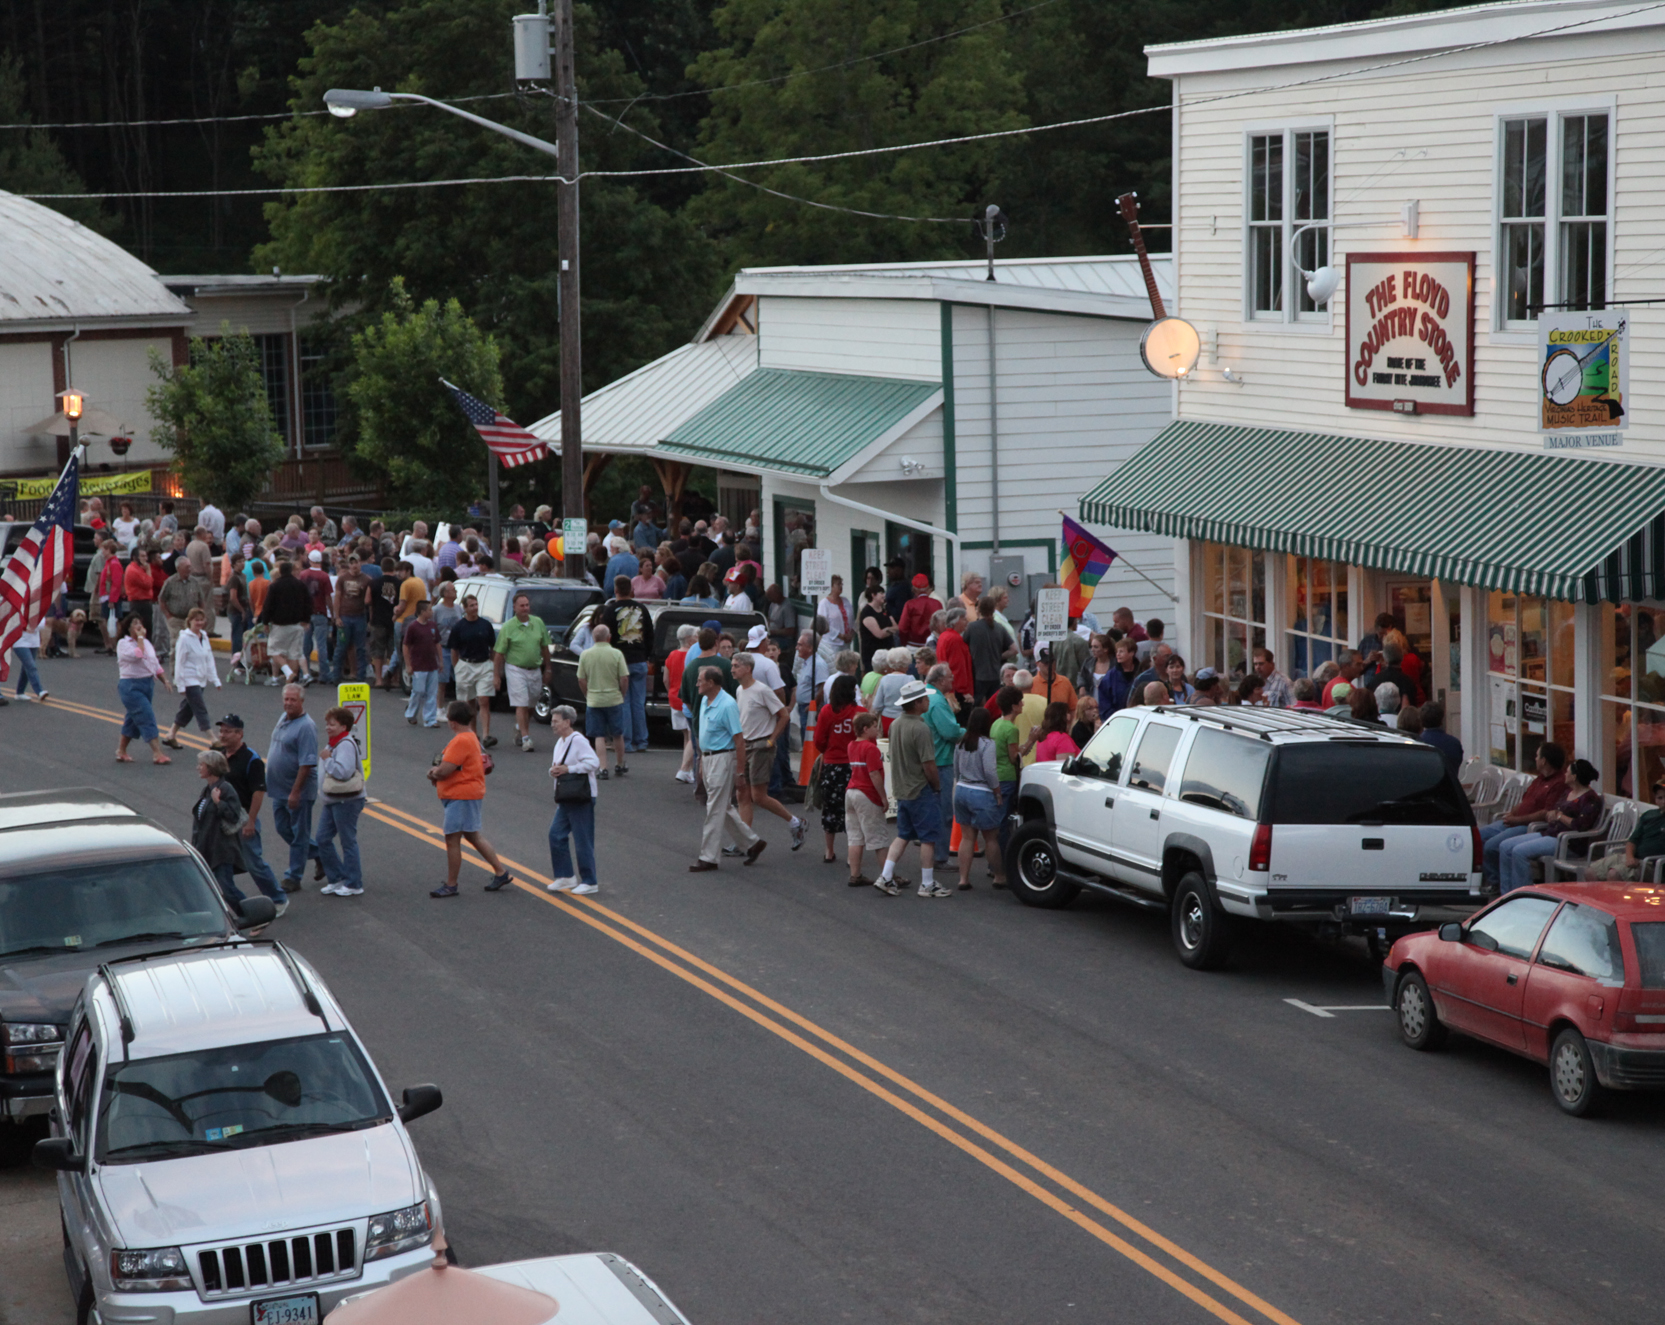 street scene at The Floyd Country Store